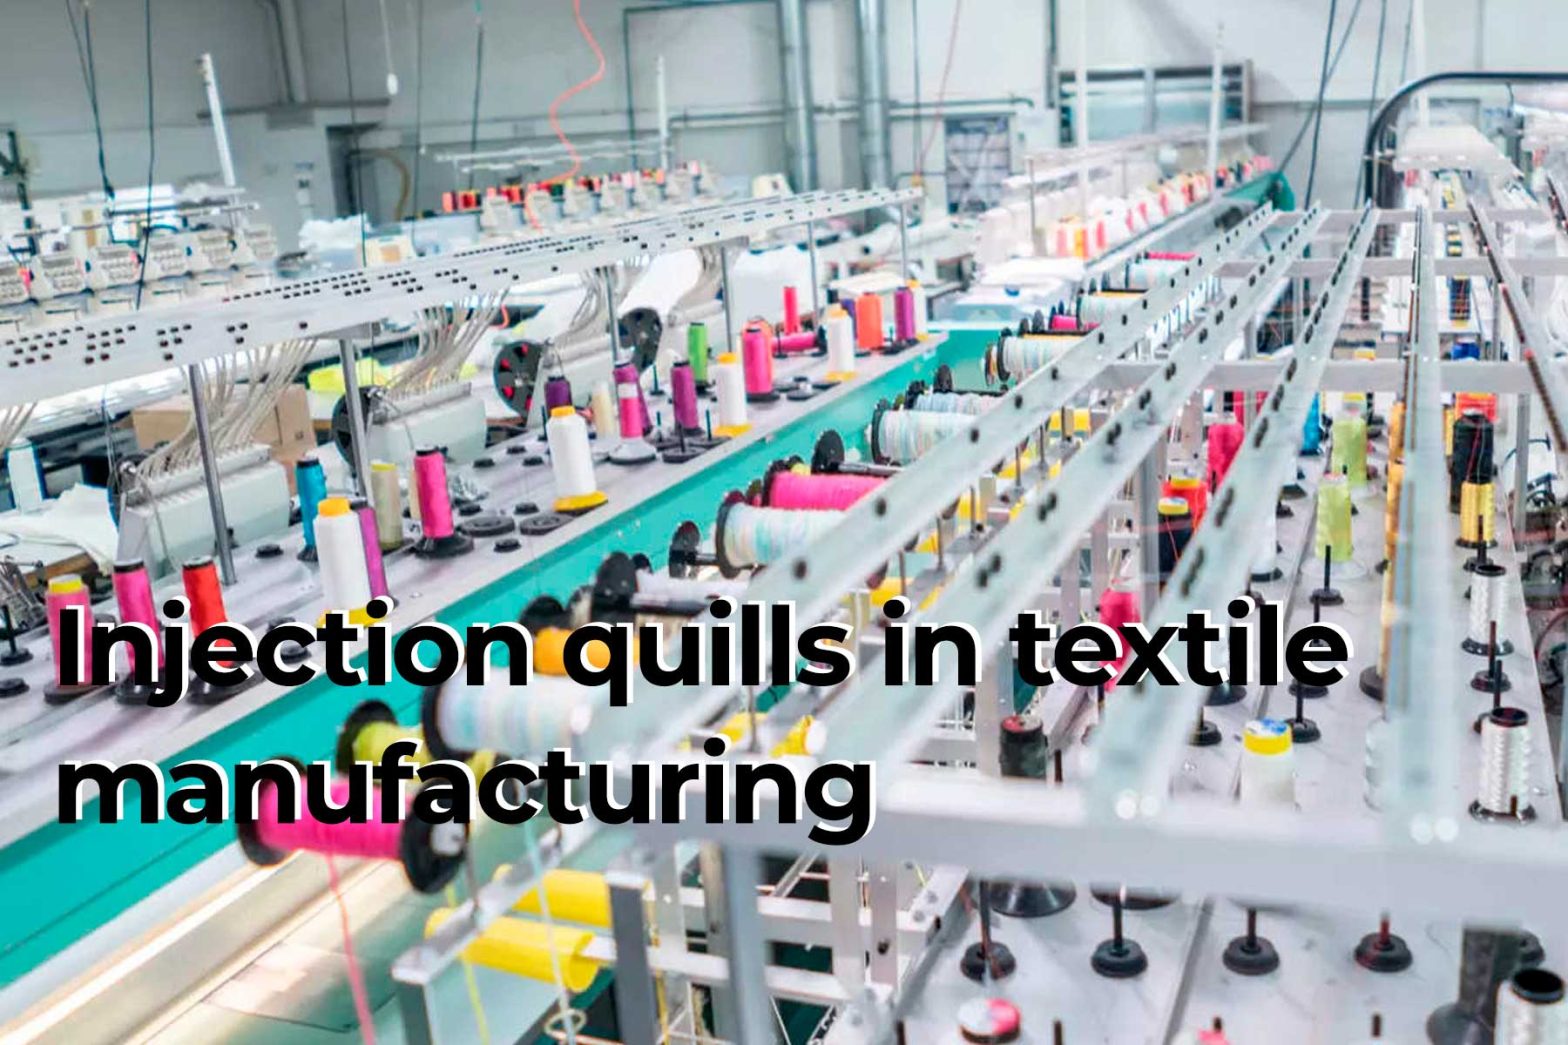 Injection quills in textile manufacturing